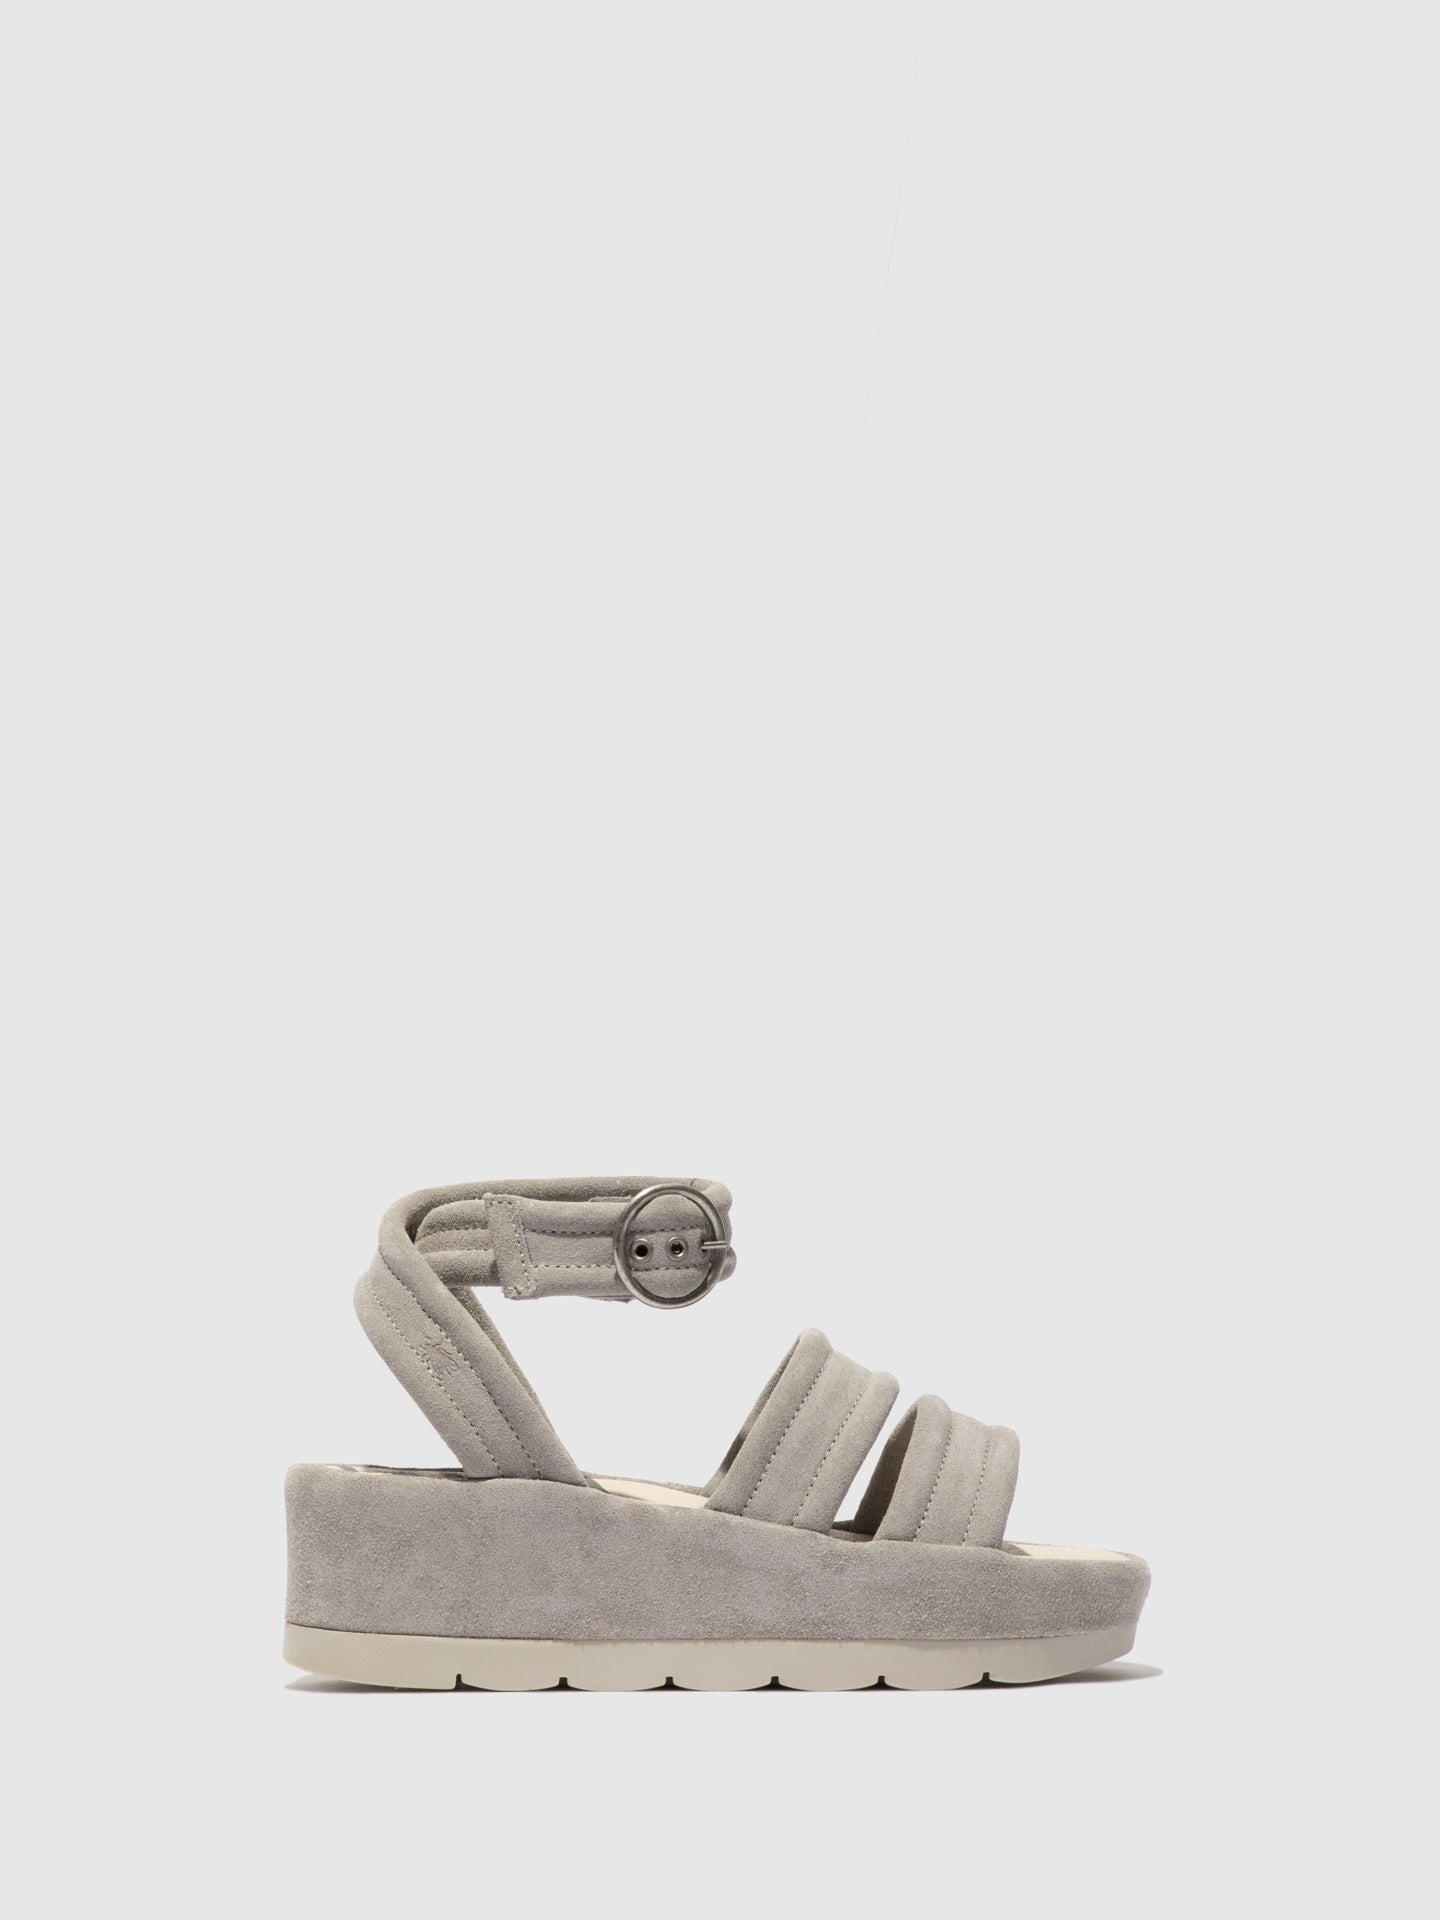 Fly London Ankle Strap Sandals BAGI170FLY CONCRETE